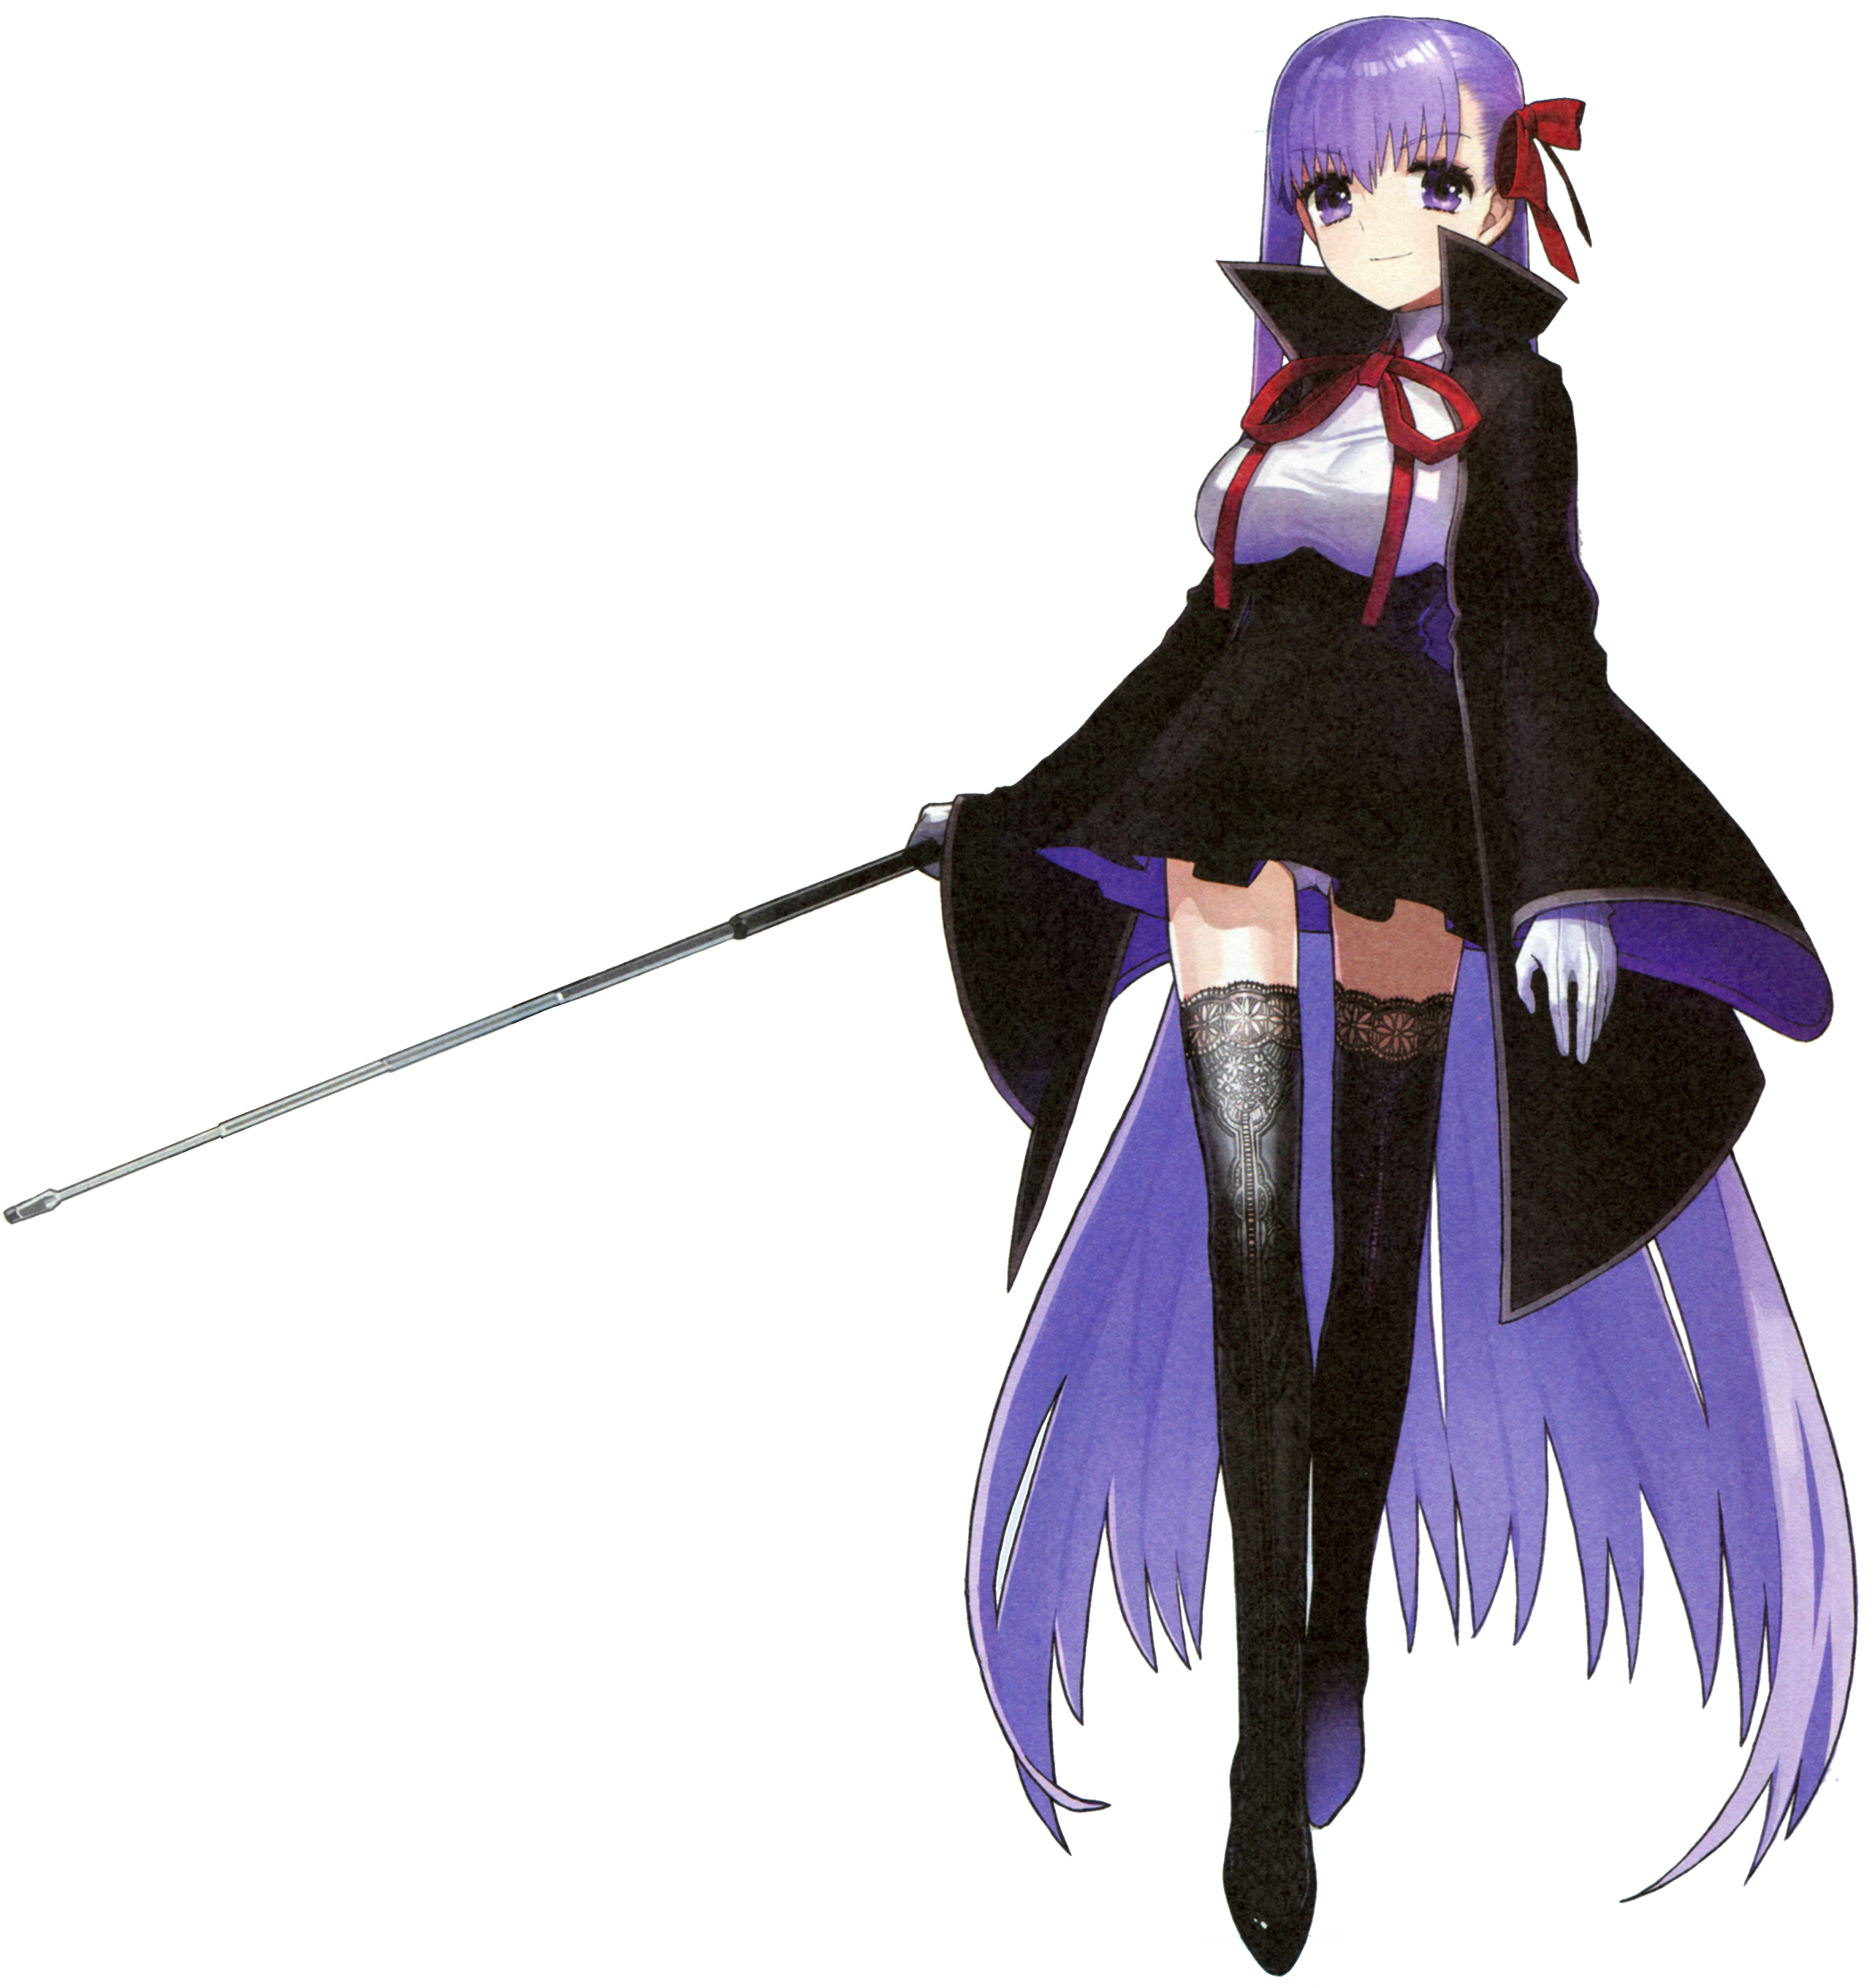 Forum Image: http://images2.wikia.nocookie.net/typemoon/images/9/9e/CCCBB.png